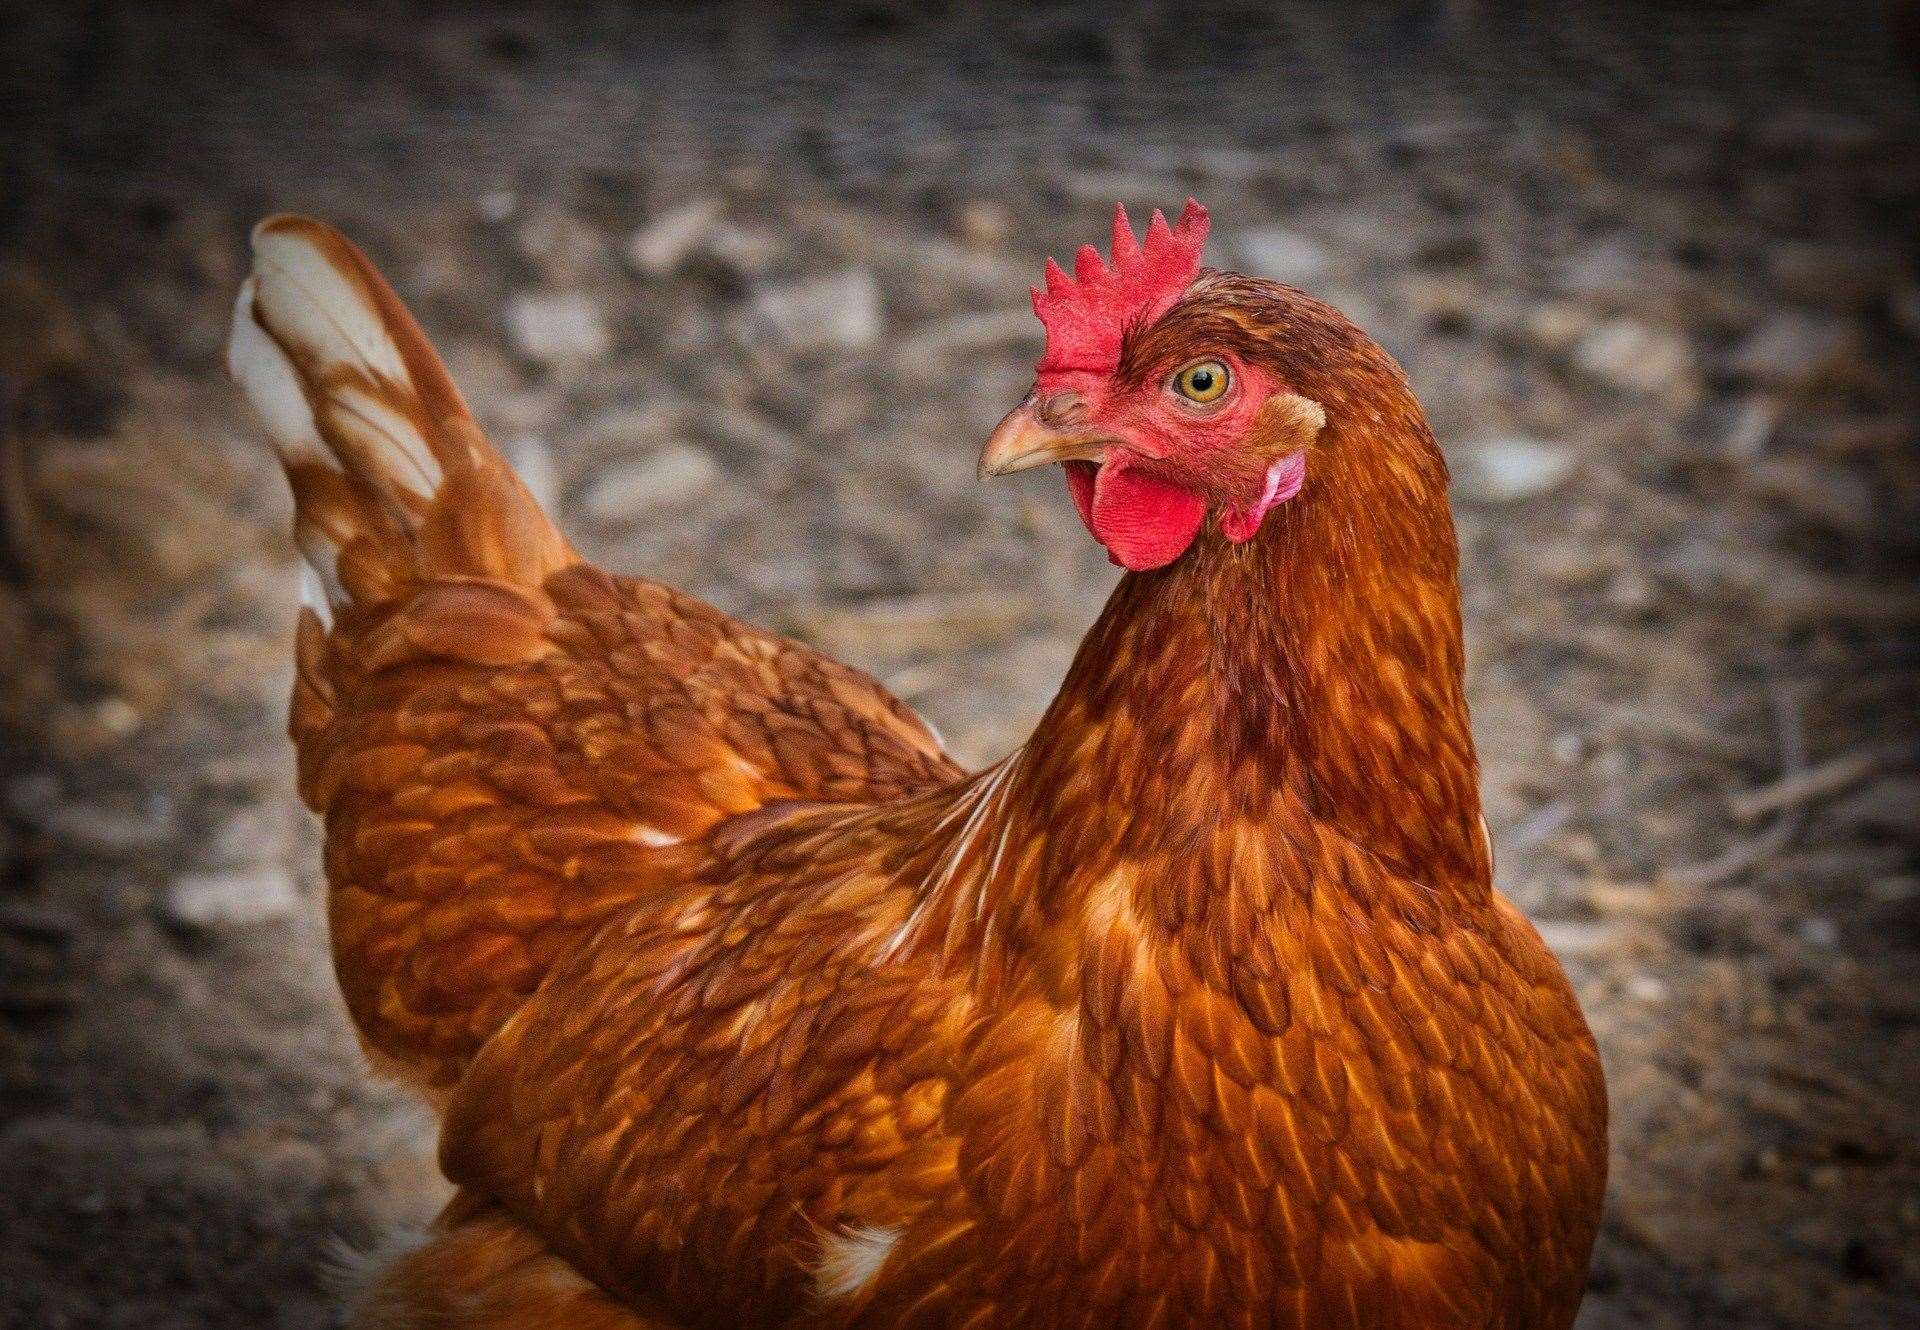 Chickens are being left by owners who bought chicks due to egg shortages fears